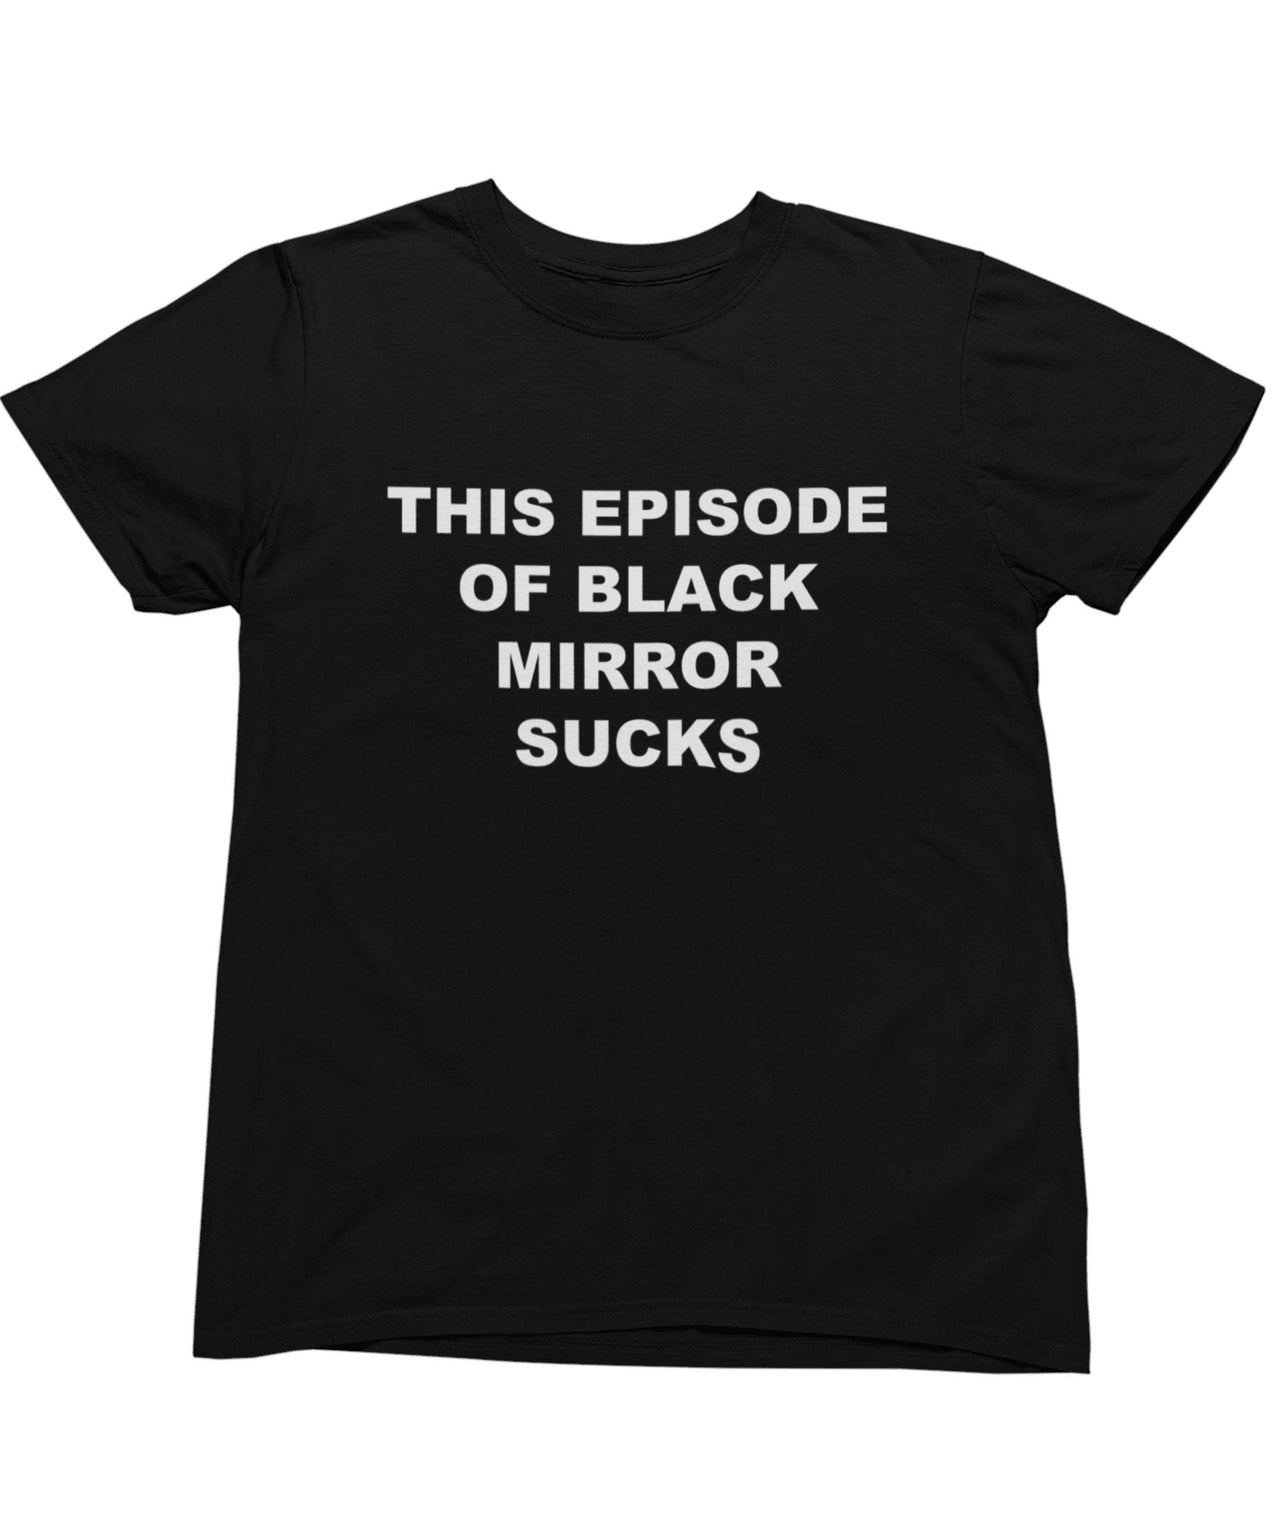 This Episode Sucks T-Shirt For Men, Inspired By Black Mirror 8Ball